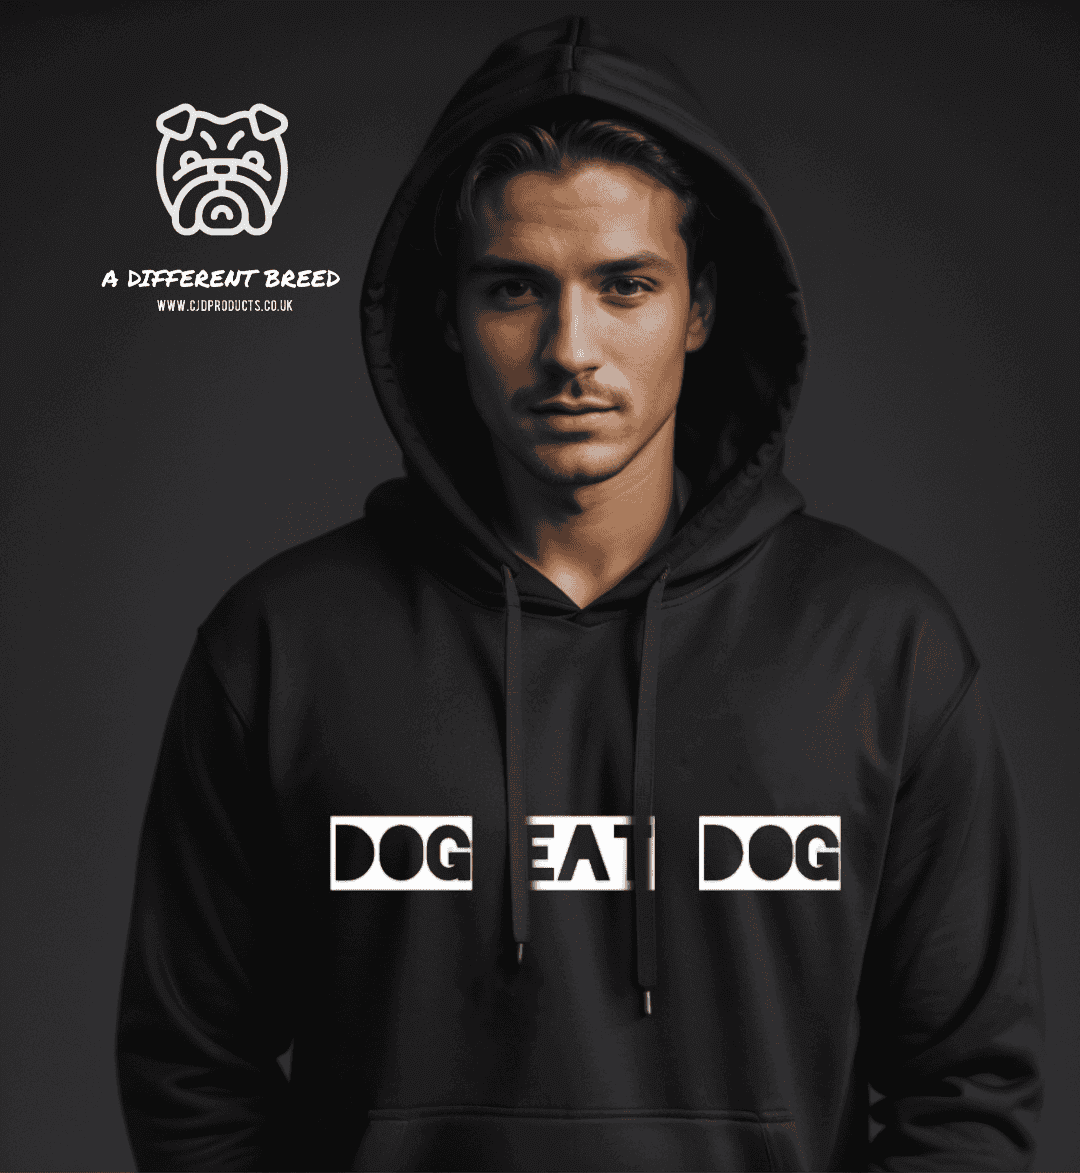 Man wearing a black hoodie with the "Dog EAT Dog" printed onto the chest in negative with white outline